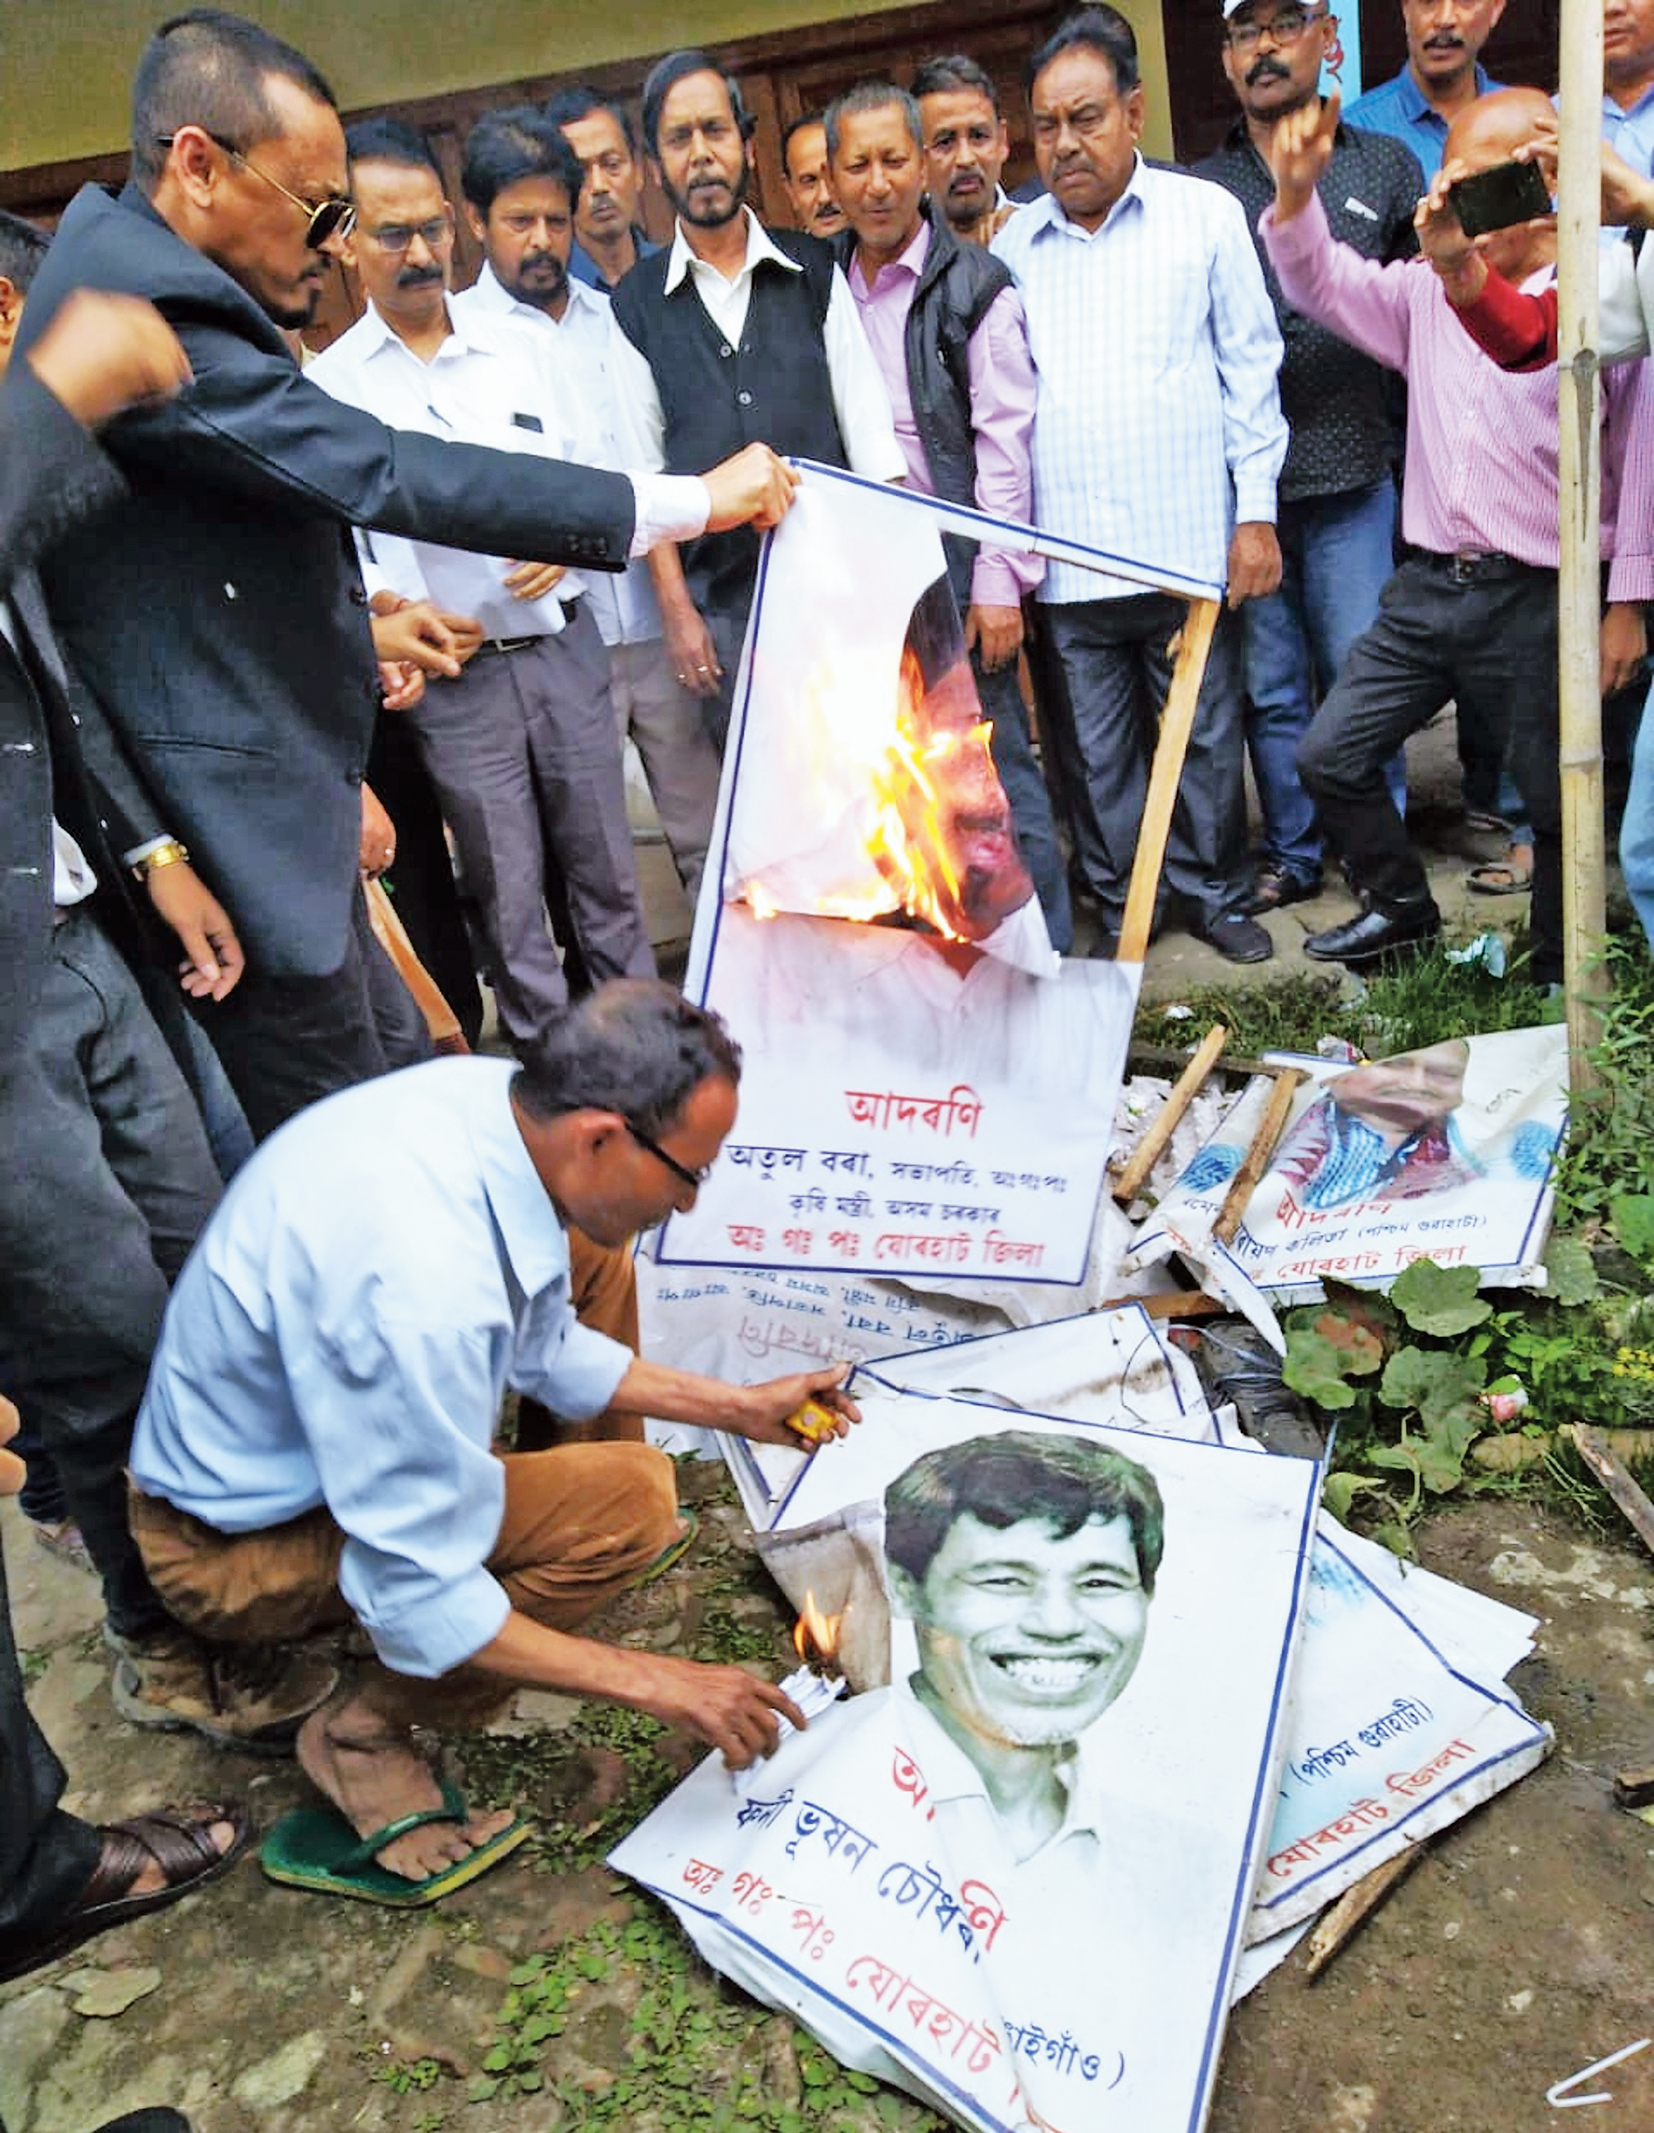 Party workers burn posters in Jorhat on Friday. 

